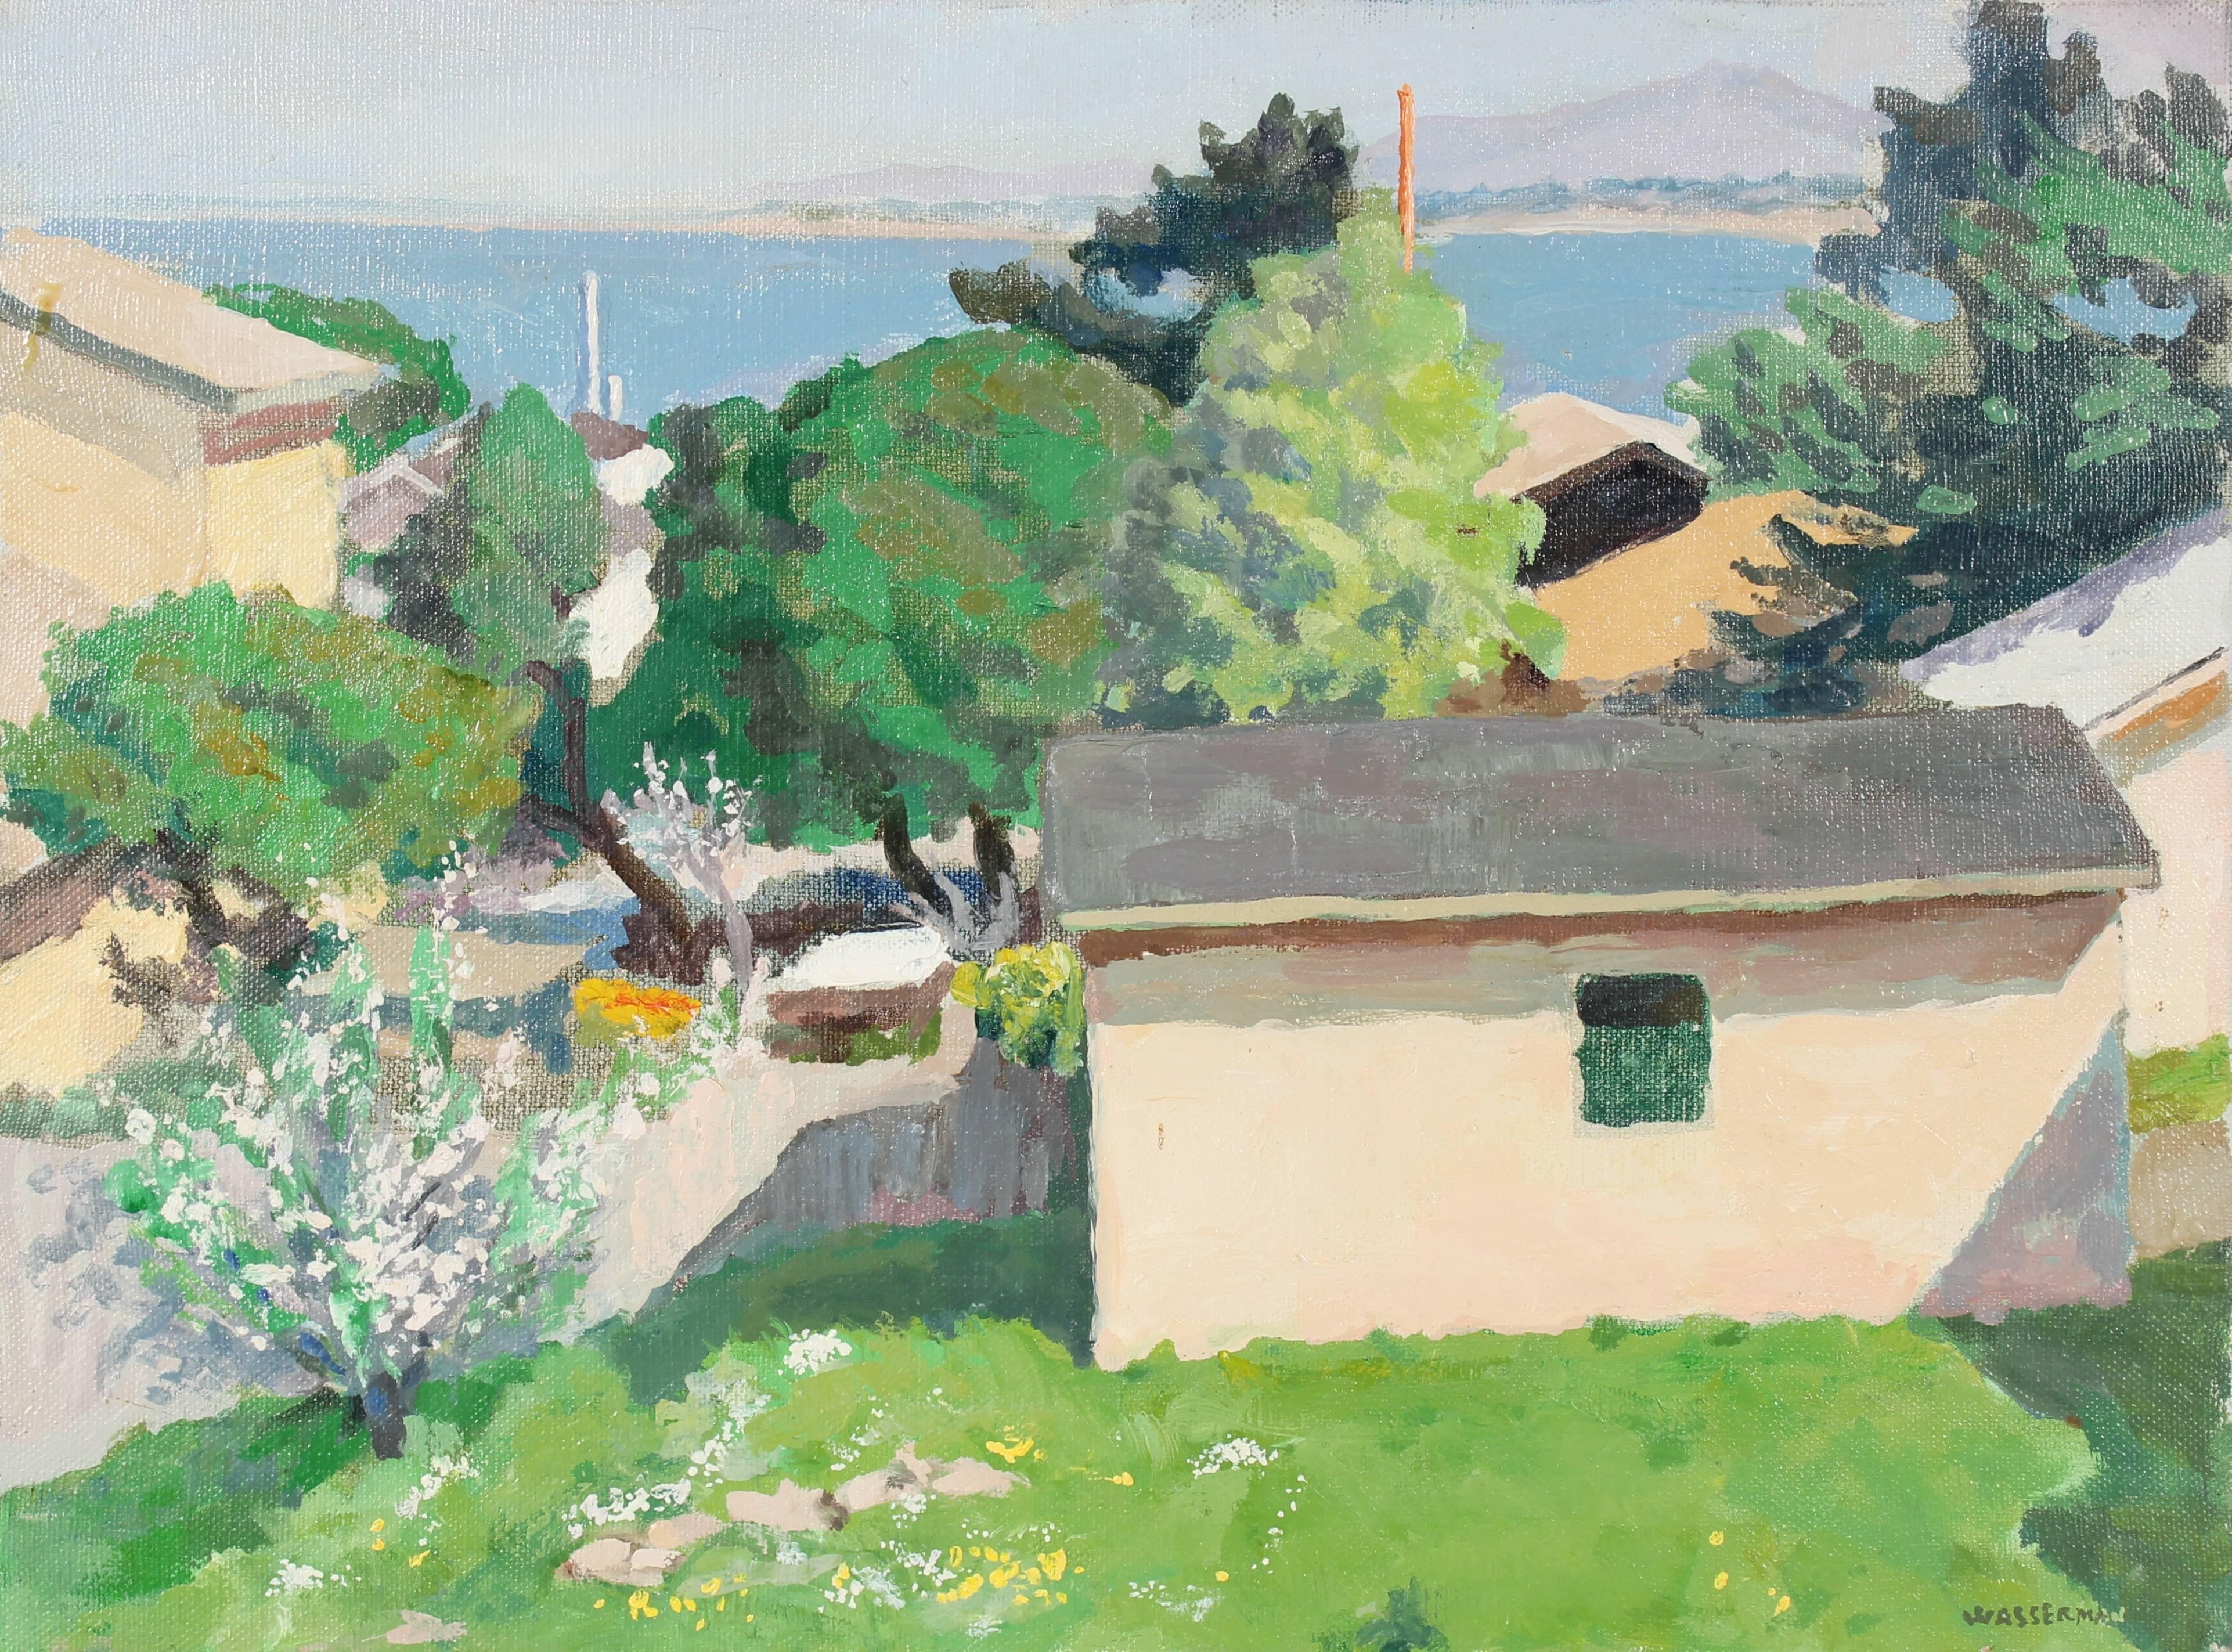 Gerald Wasserman Landscape Painting - Bay Area Neighborhood with Trees, Oil on Canvas, Circa 1989